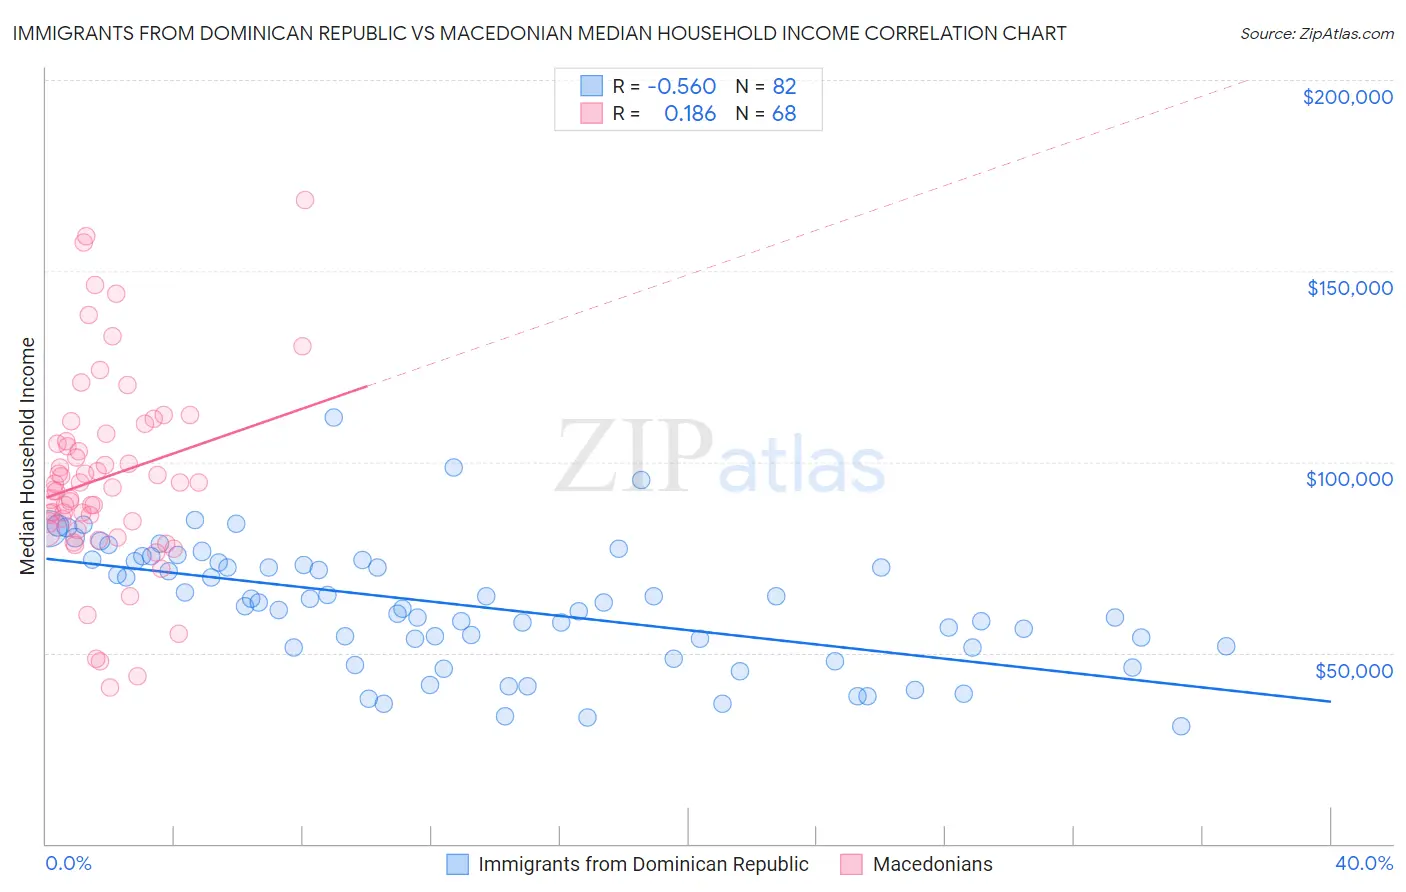 Immigrants from Dominican Republic vs Macedonian Median Household Income